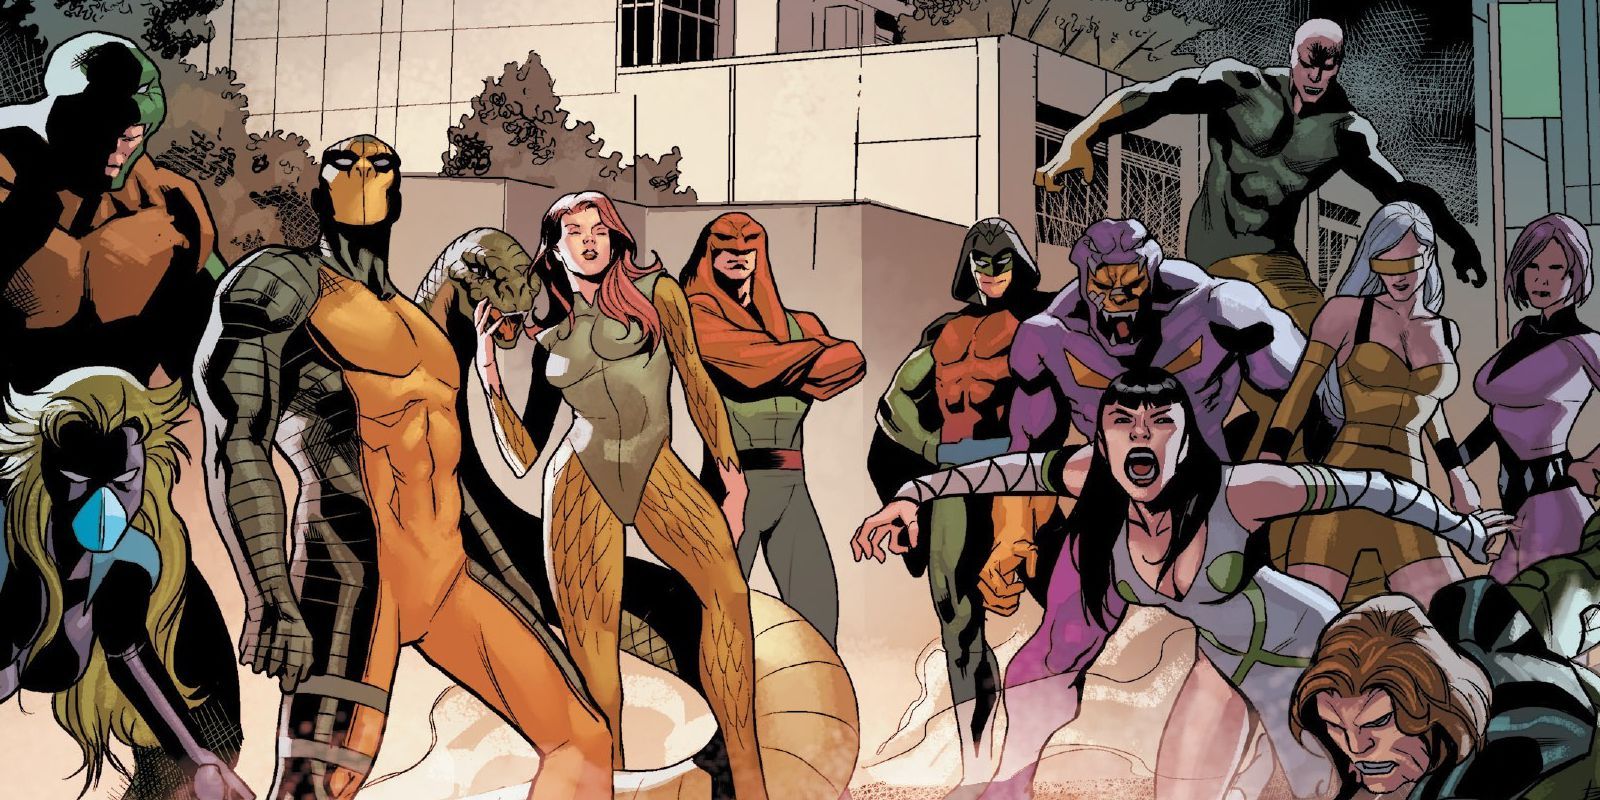 The Serpent Society gathers in a Marvel Comic